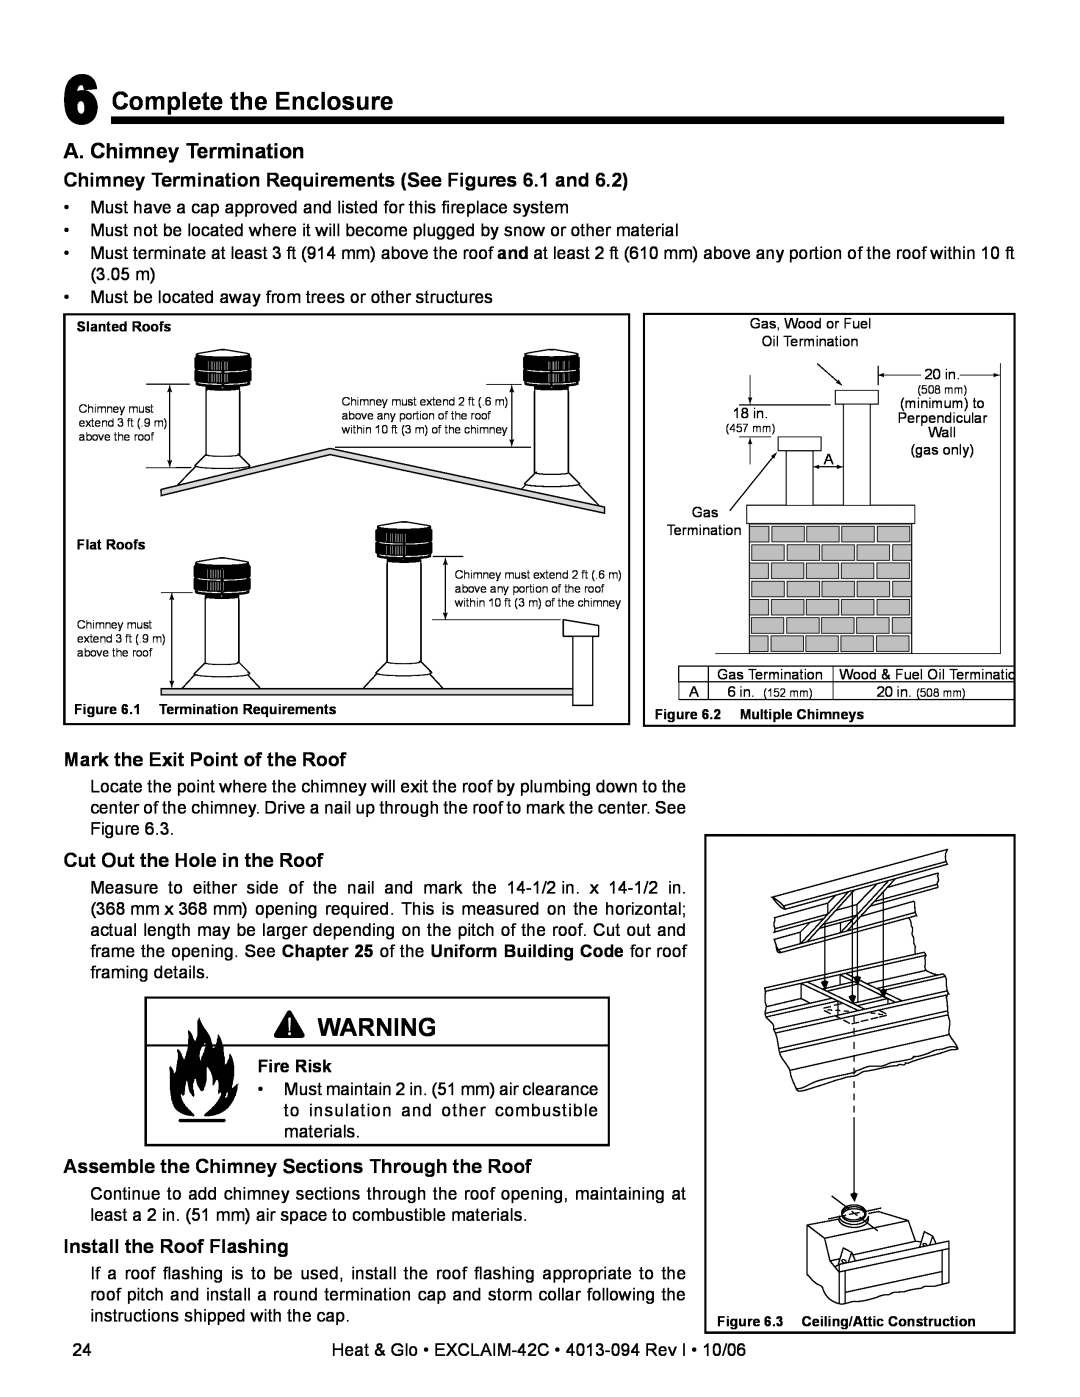 Heat & Glo LifeStyle EXCLAIM-42H-C, EXCLAIM-42T-C owner manual Complete the Enclosure, A. Chimney Termination, Fire Risk 